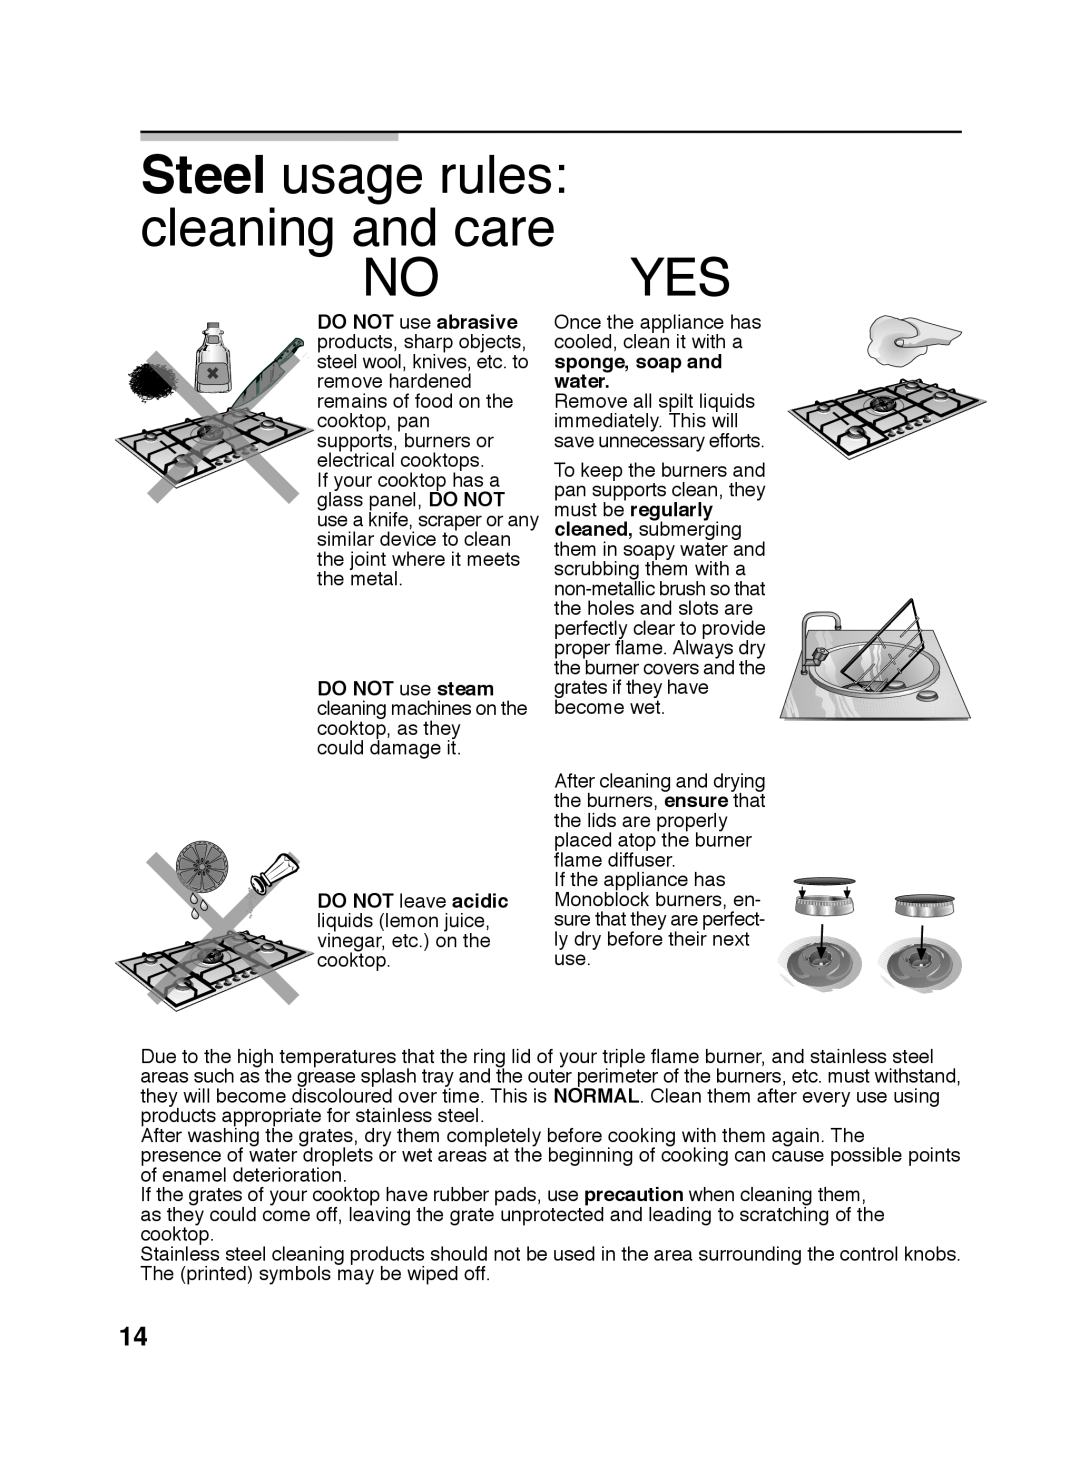 Bosch Appliances PGL985UC manual Steel usage rules cleaning and care NO YES, DO NOT use abrasive 